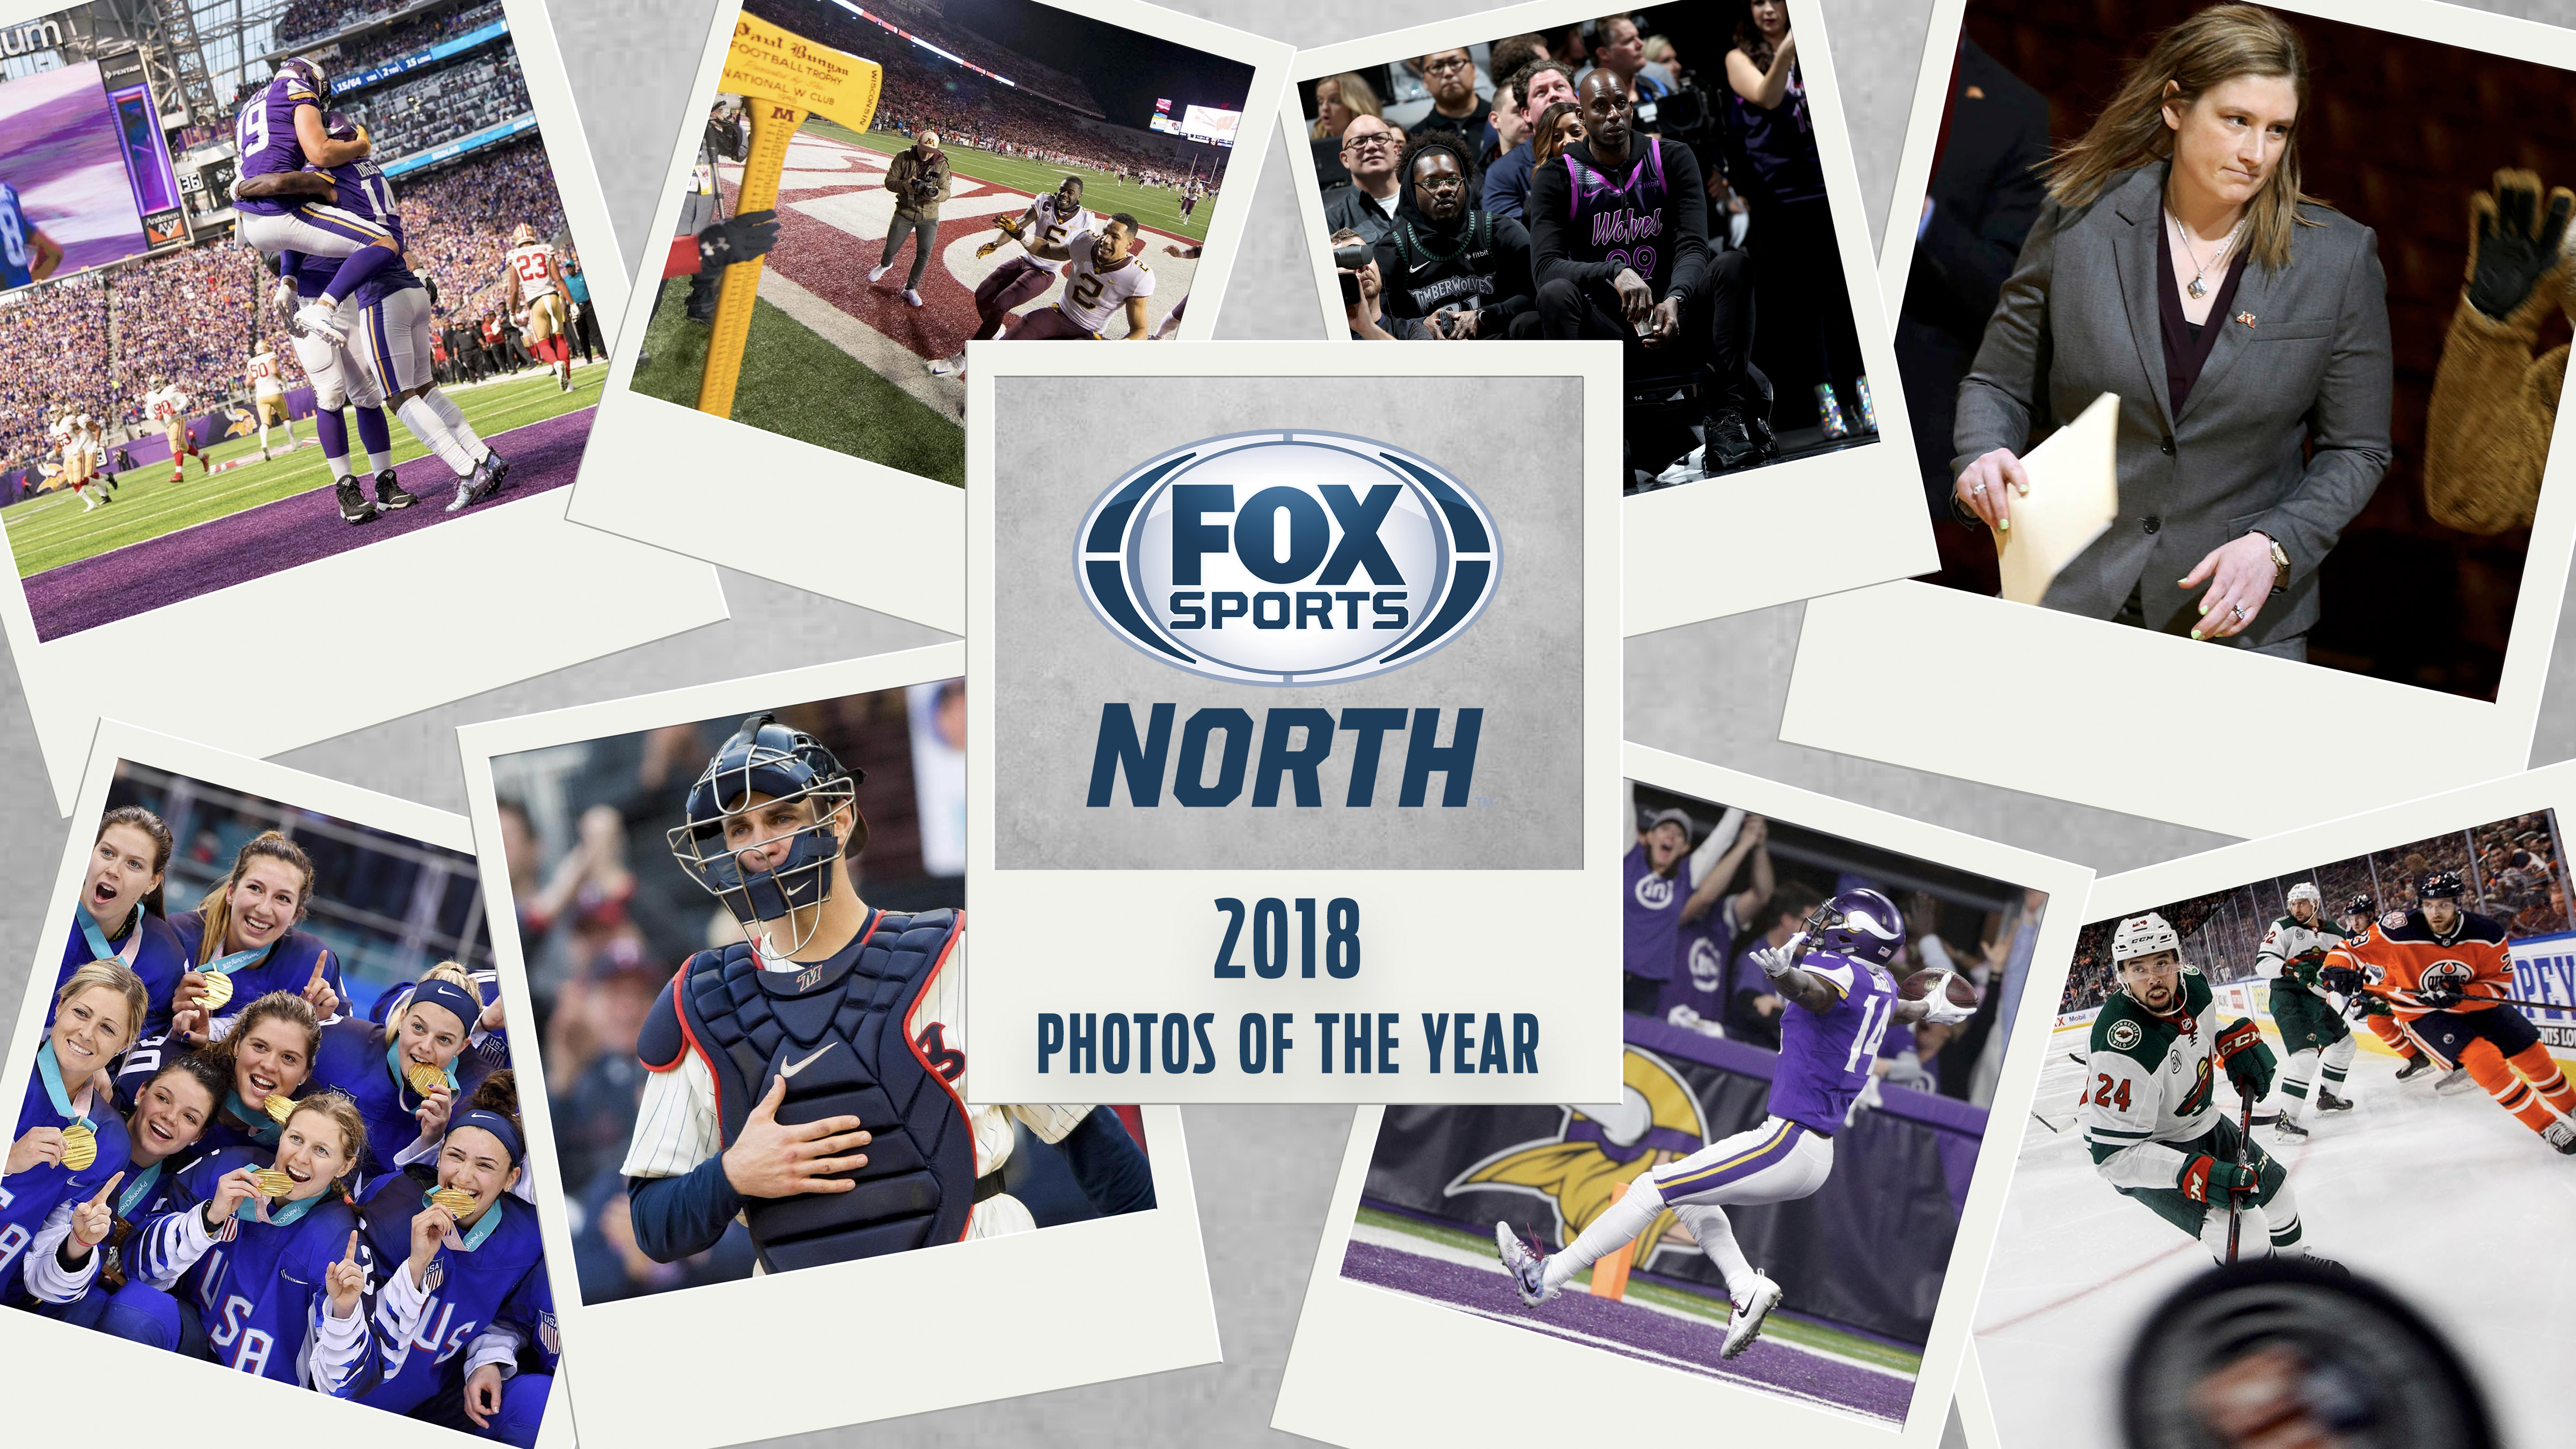 Fox Sports North's 2018 photos of the year